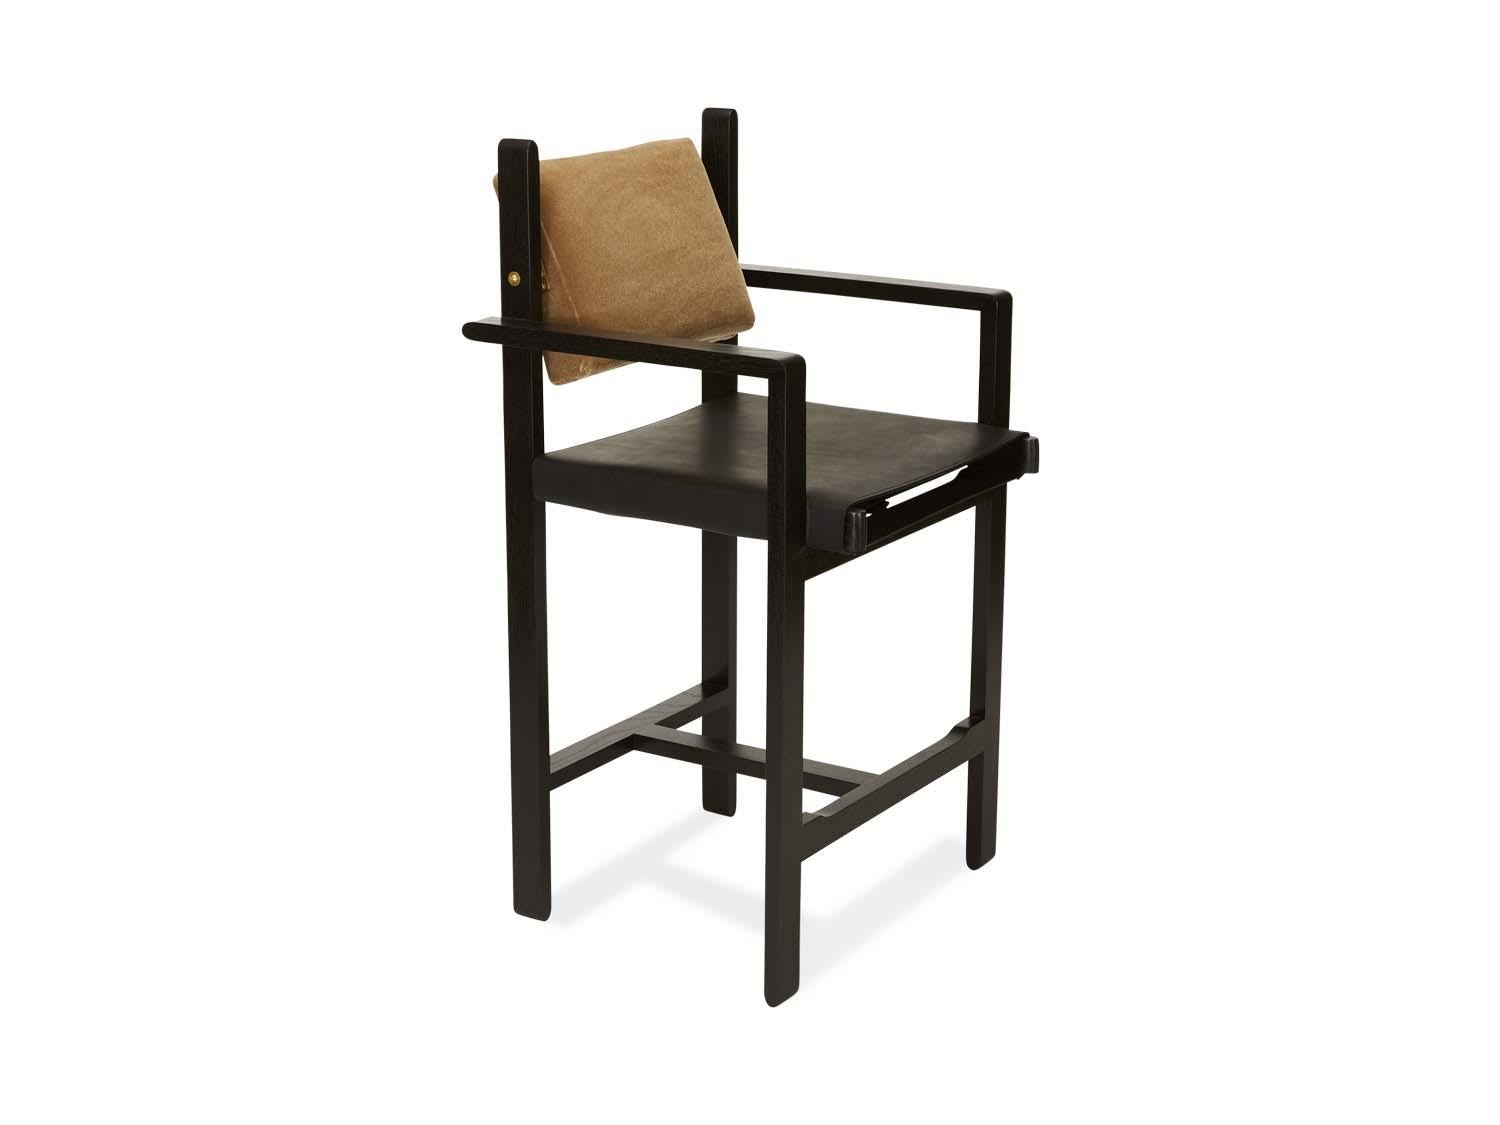 The Morro barstool is made from a solid walnut or oak frame and features an upholstered back cushion and a leather sling seat. An optional loose seat cushion is also available. Inspired by the articulated connections of Bauhaus